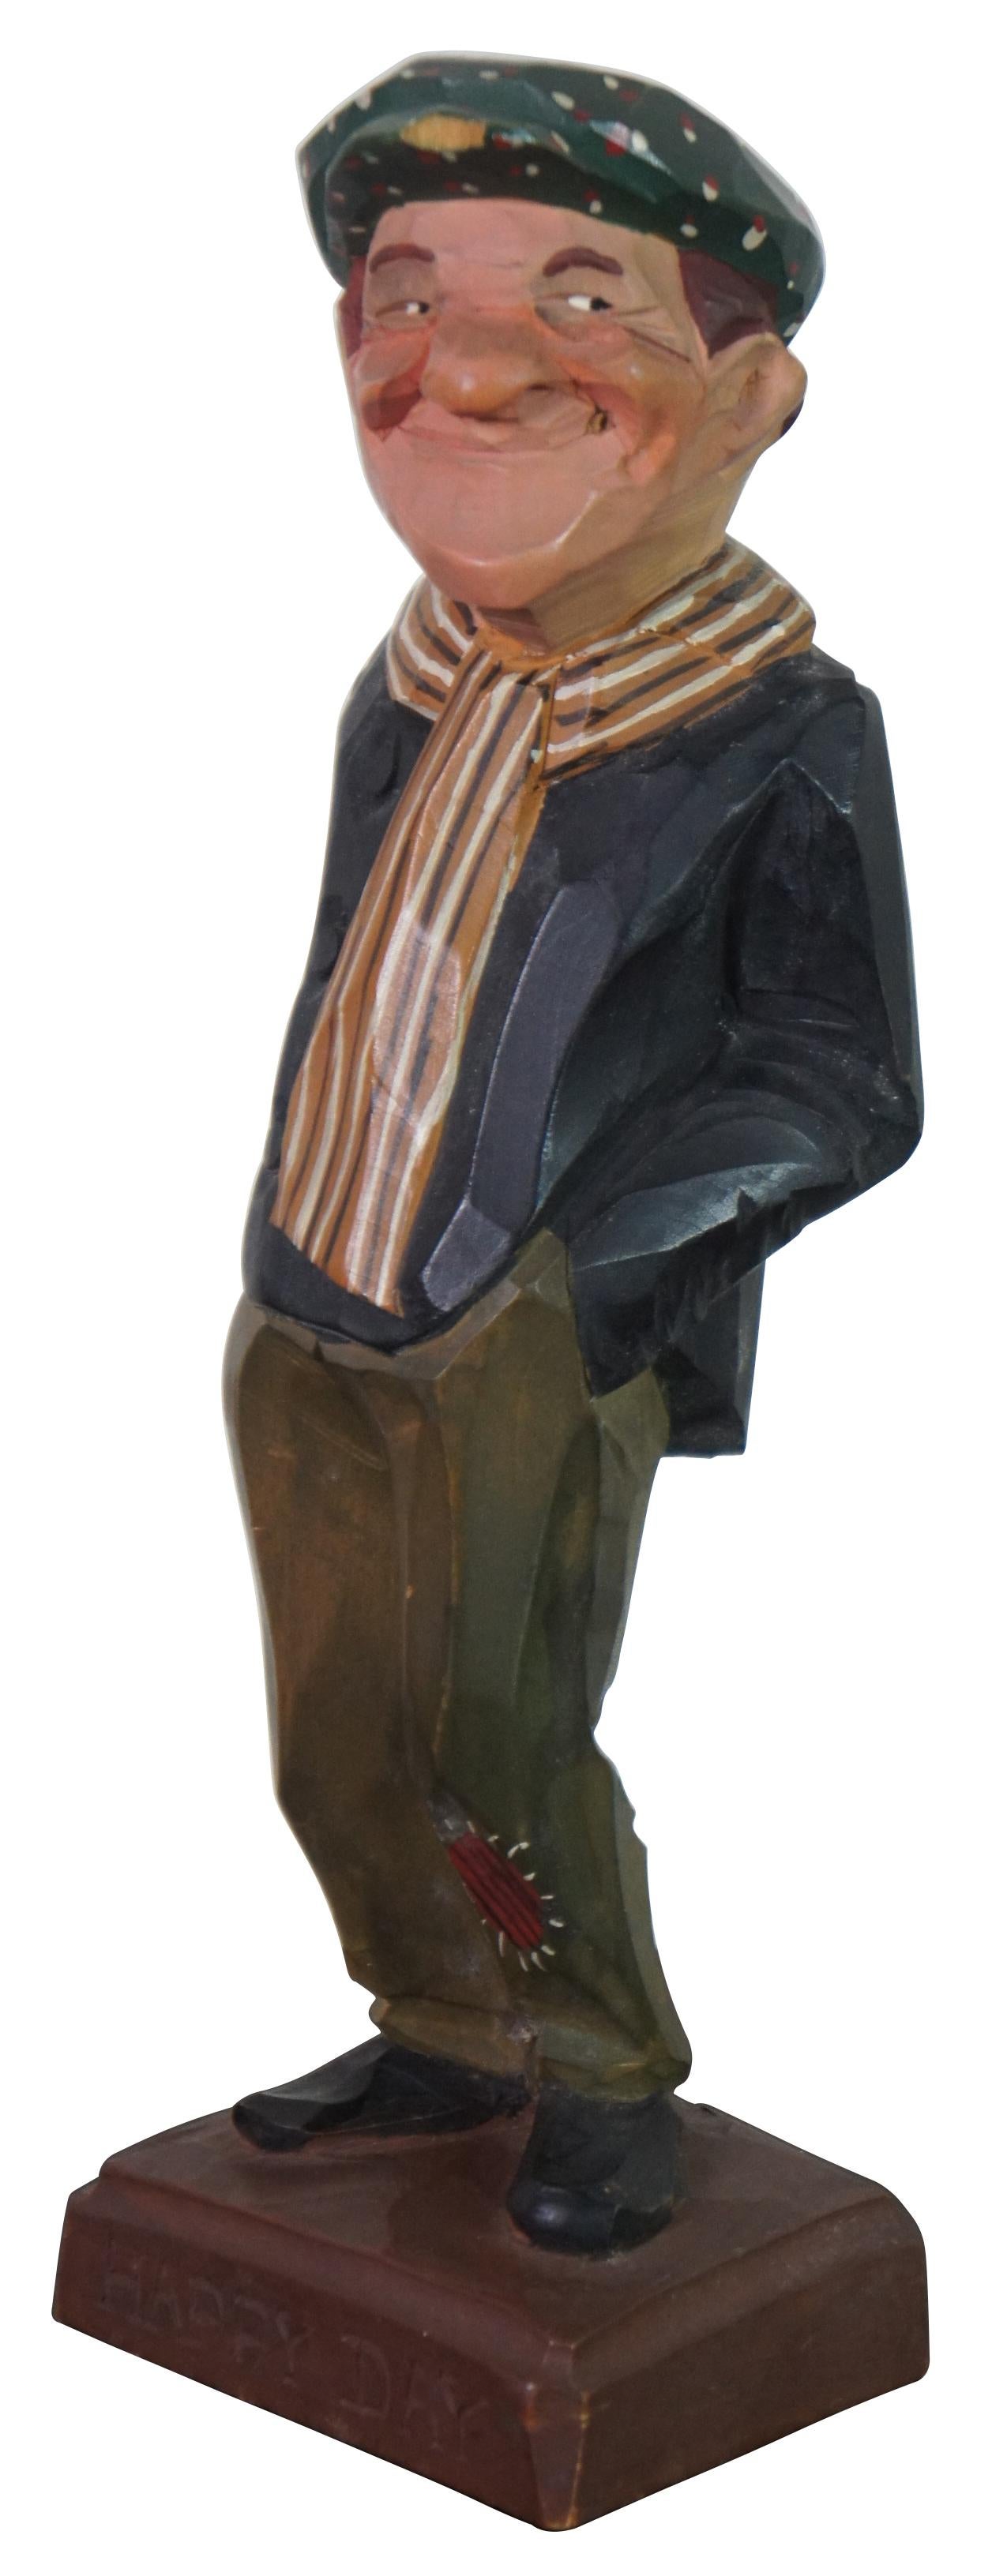 Mid century carved wood folk art figure by Gerald Pat Hannah titled “Happy Day,” featuring a man with patched trousers, striped scarf and spotted cap, standing with his hands in his pockets, once smoking a cigar. “One of the original three Hannah